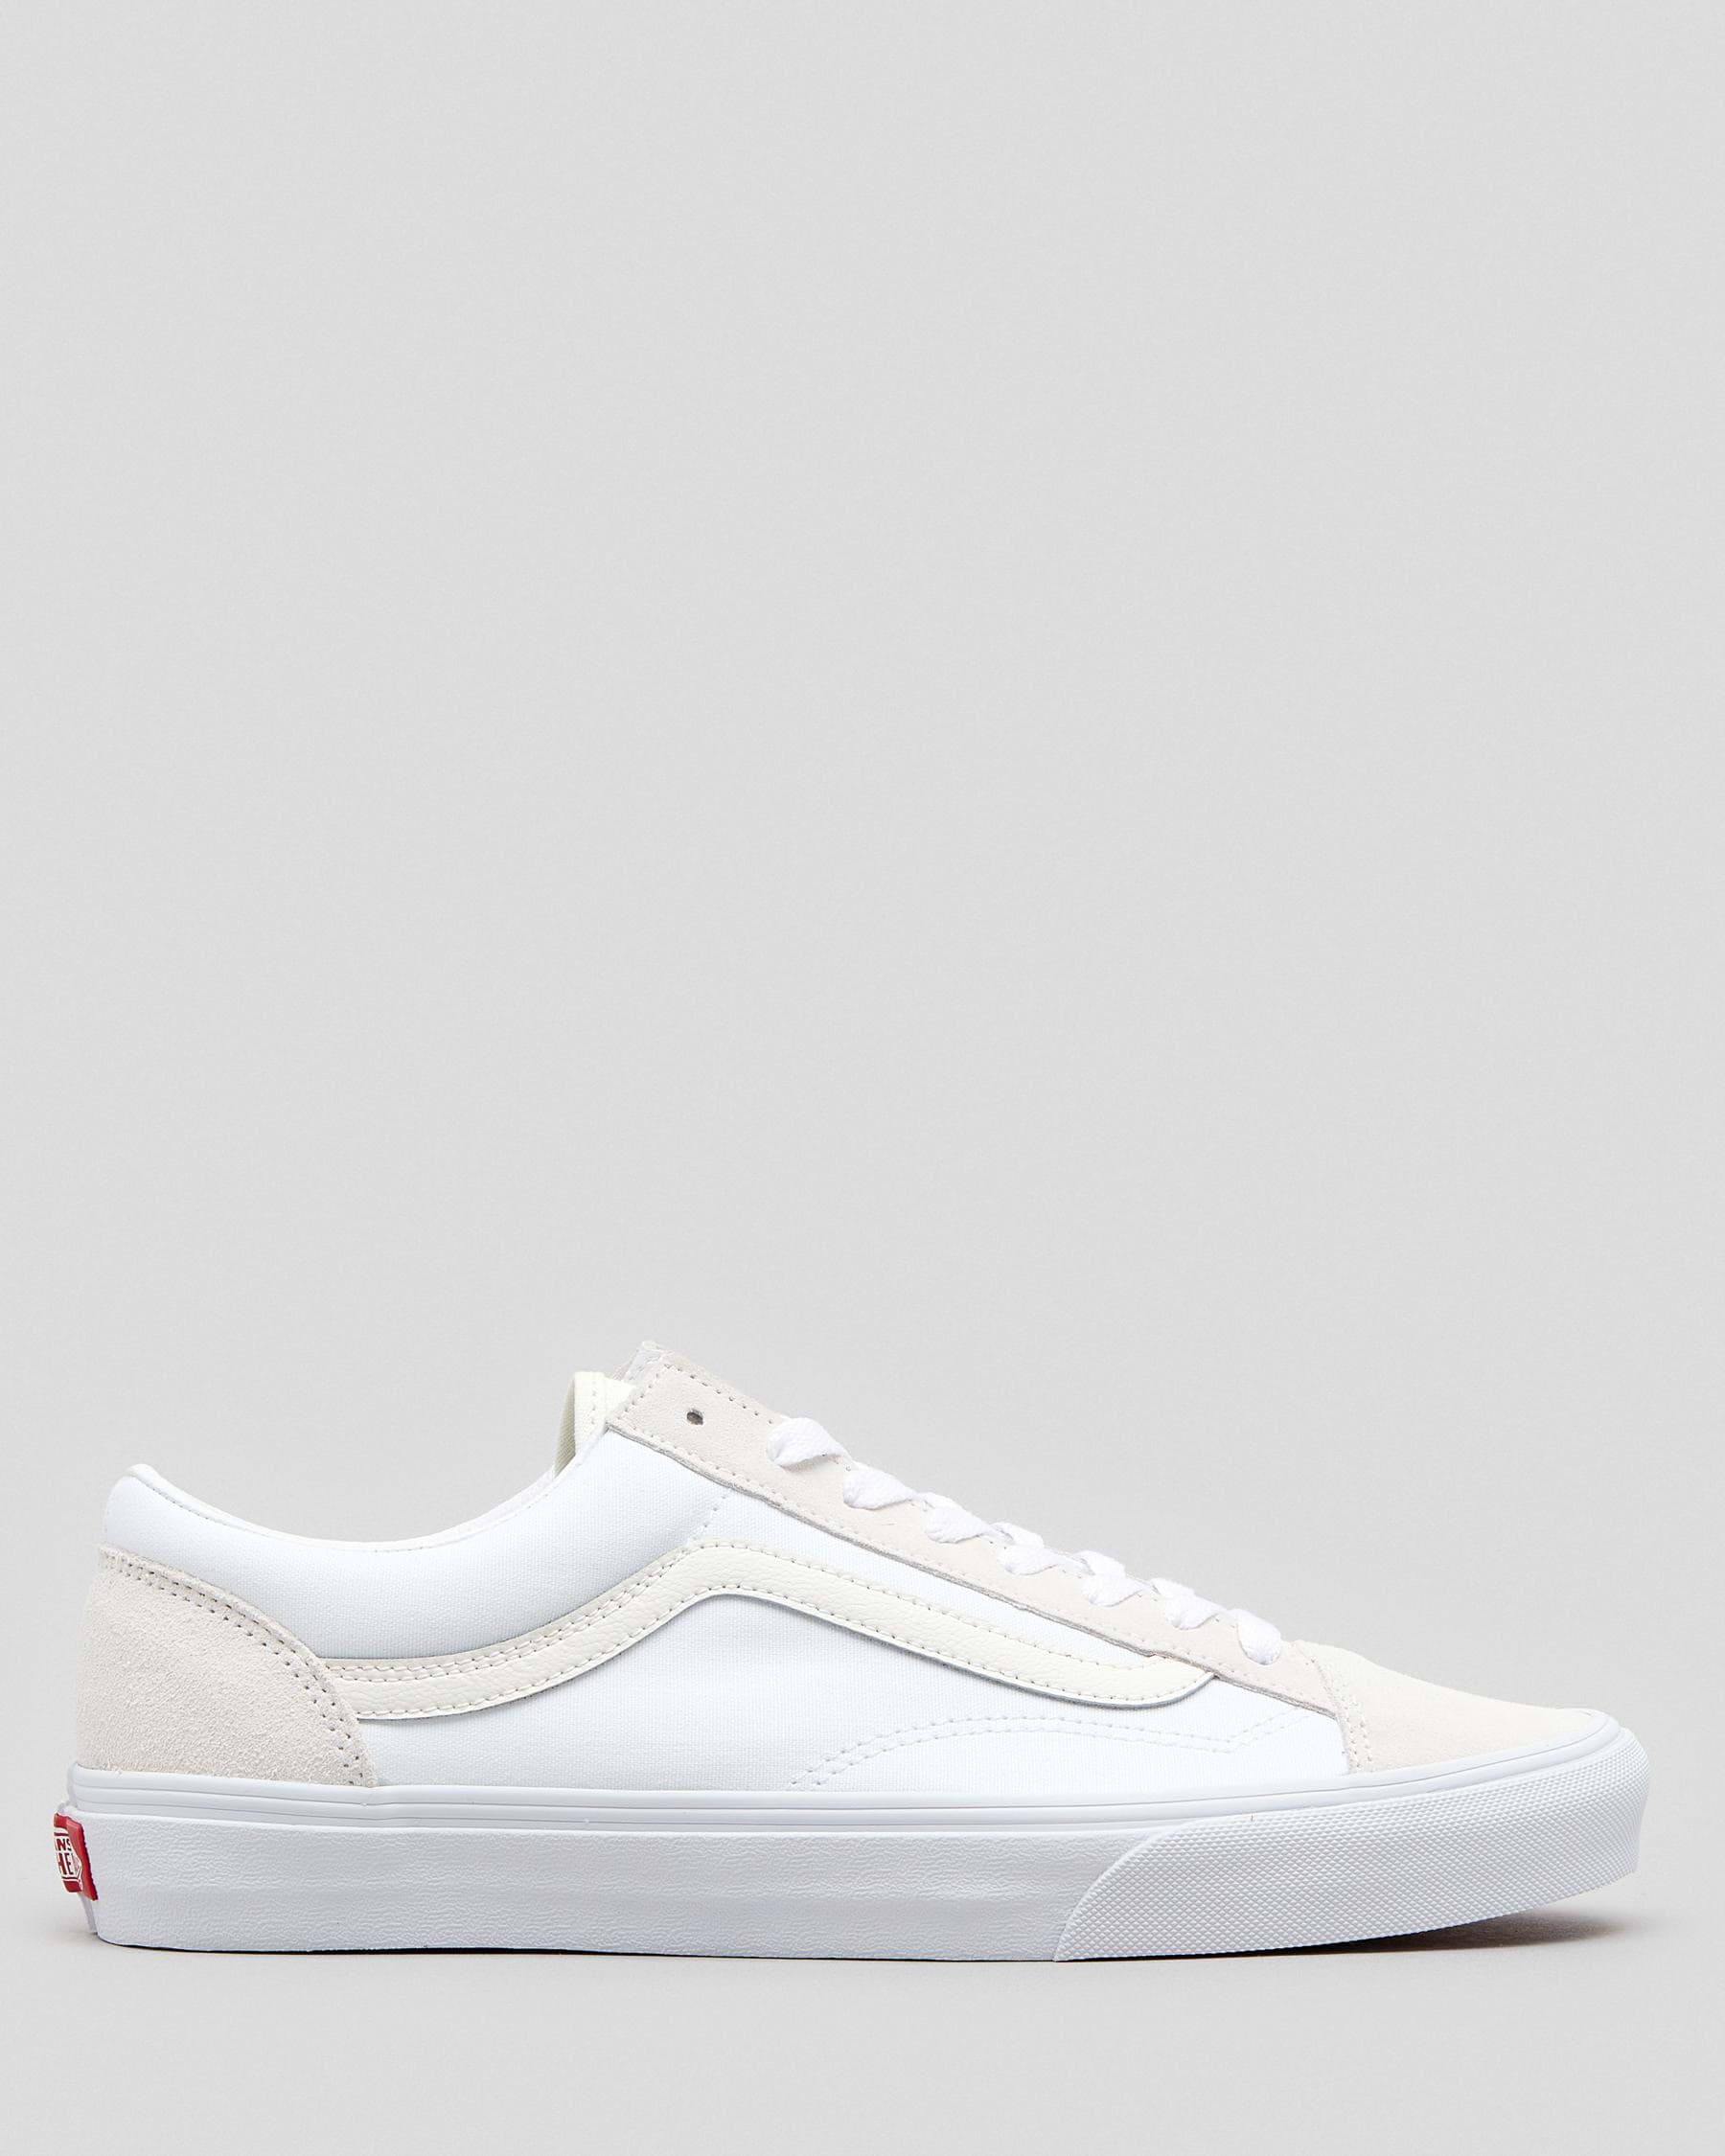 Shop Vans Style 36 Shoes In Marshmallow/true White - Fast Shipping ...